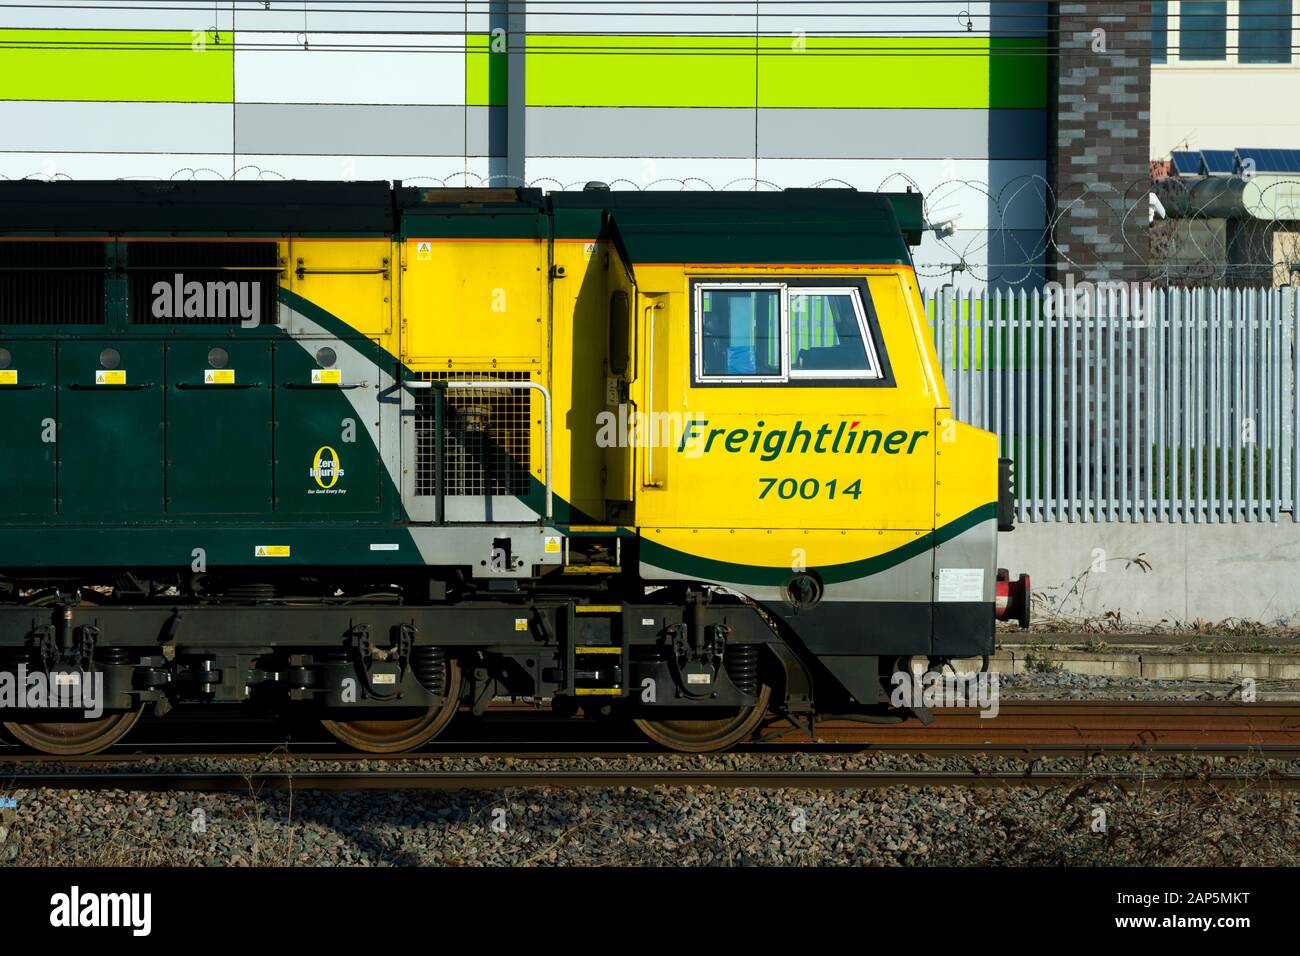 A Freightliner class 70 diesel locomotive at Rugby, Warwickshire, UK Stock Photo